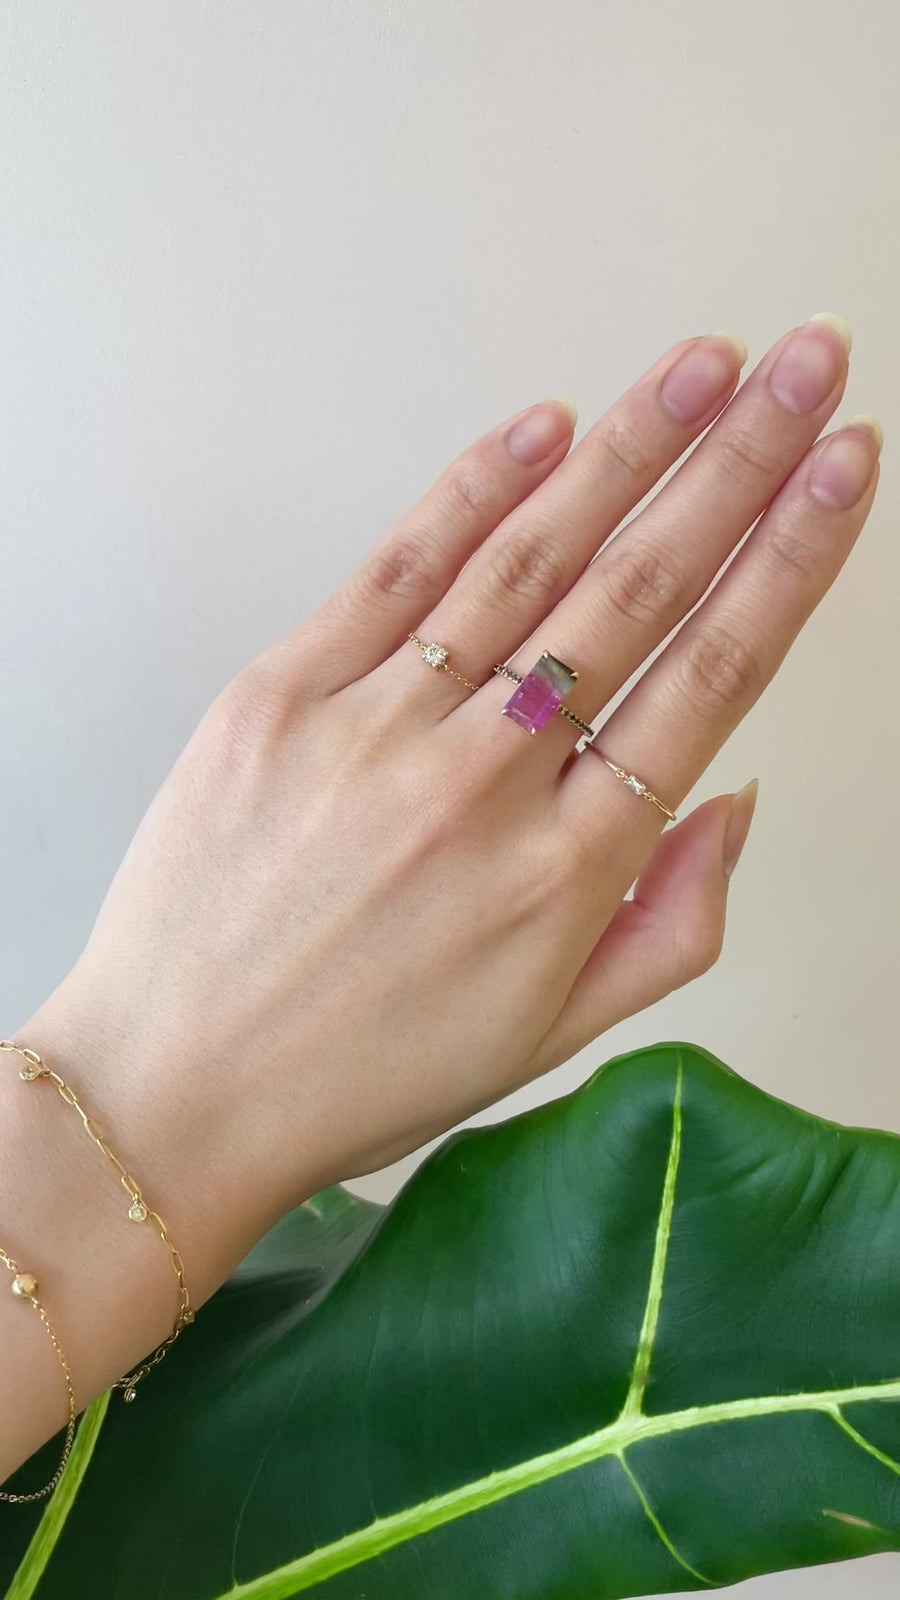 Watermelon tourmaline protection ring